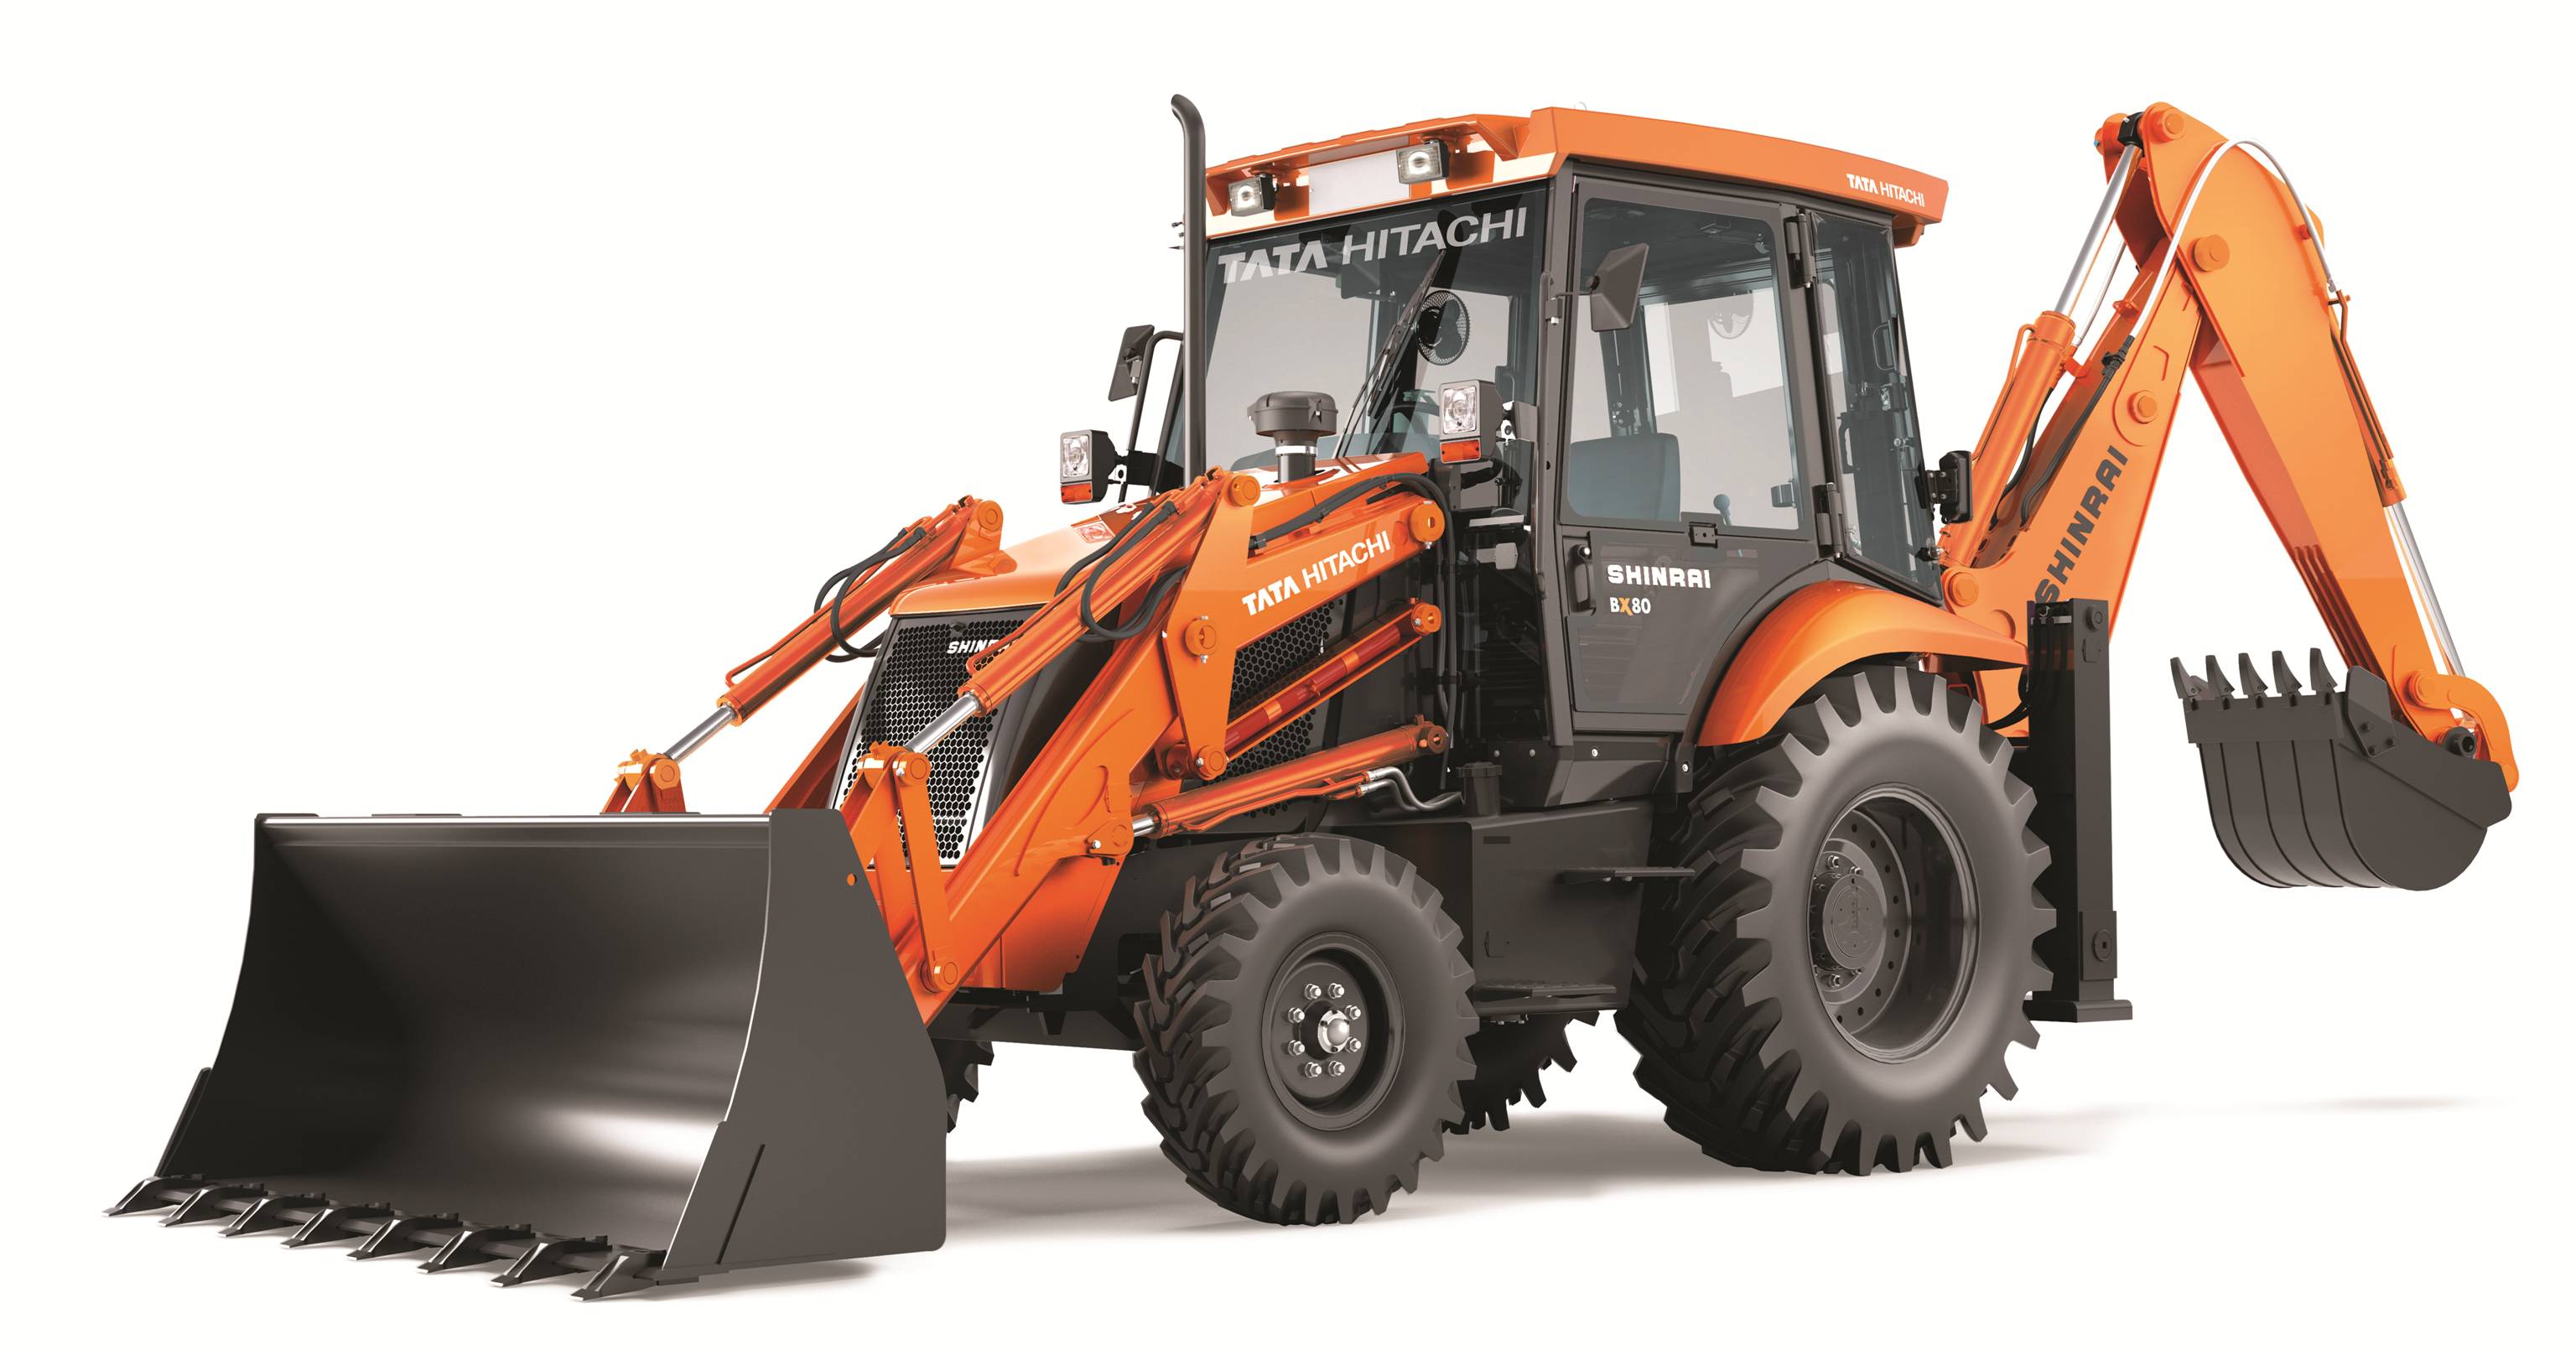 Announcing the launch of the all new Backhoe Loader, TATA HITACHI